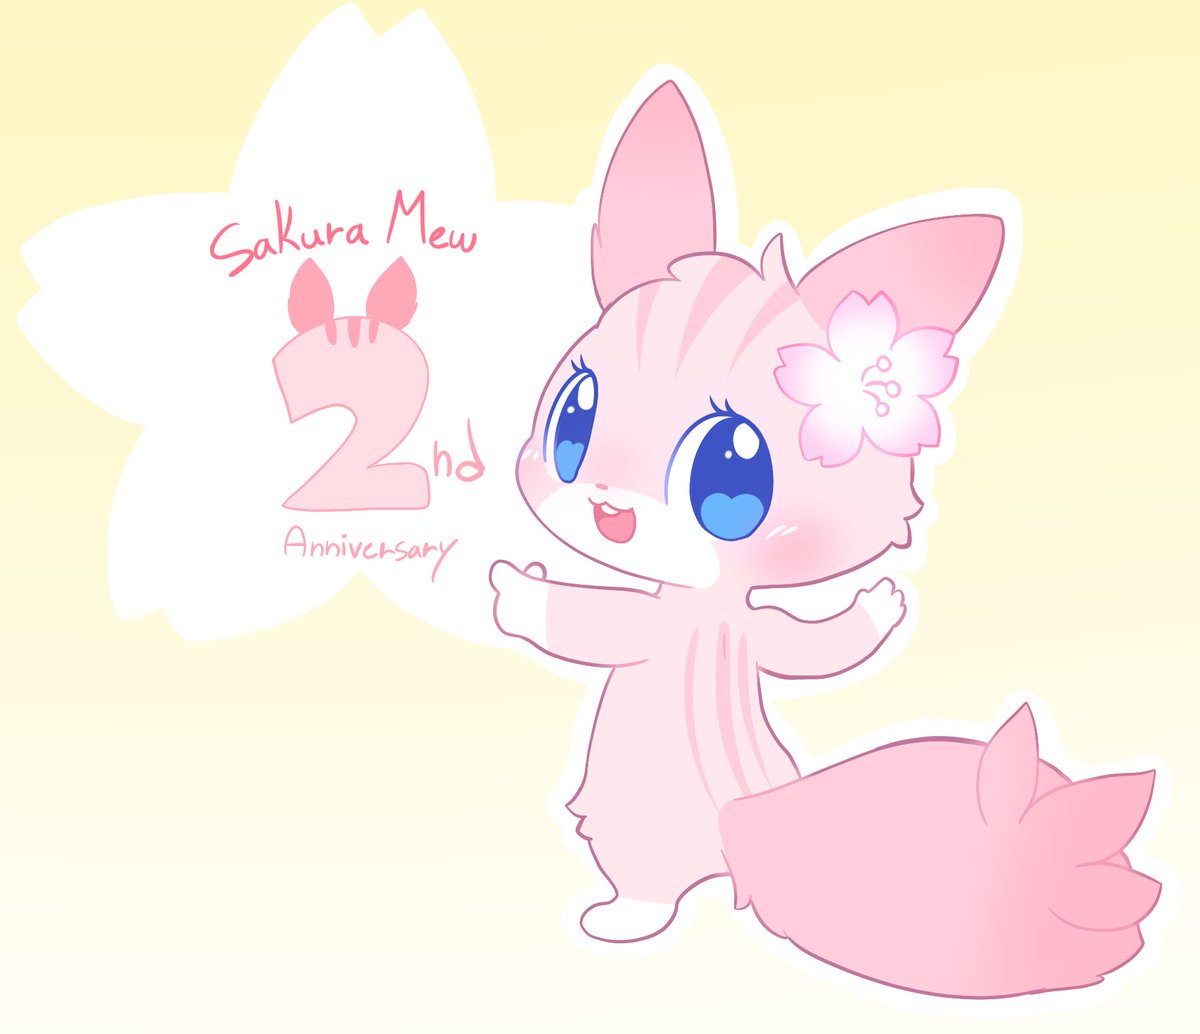 🌸 Mew 🌸 . . Likes, saves and comments are appreciated, they help me a  lot! ʚ(｡˃ ᵕ ˂ )ɞ. . . #sakura #mew #pokemon #cute #art #anime